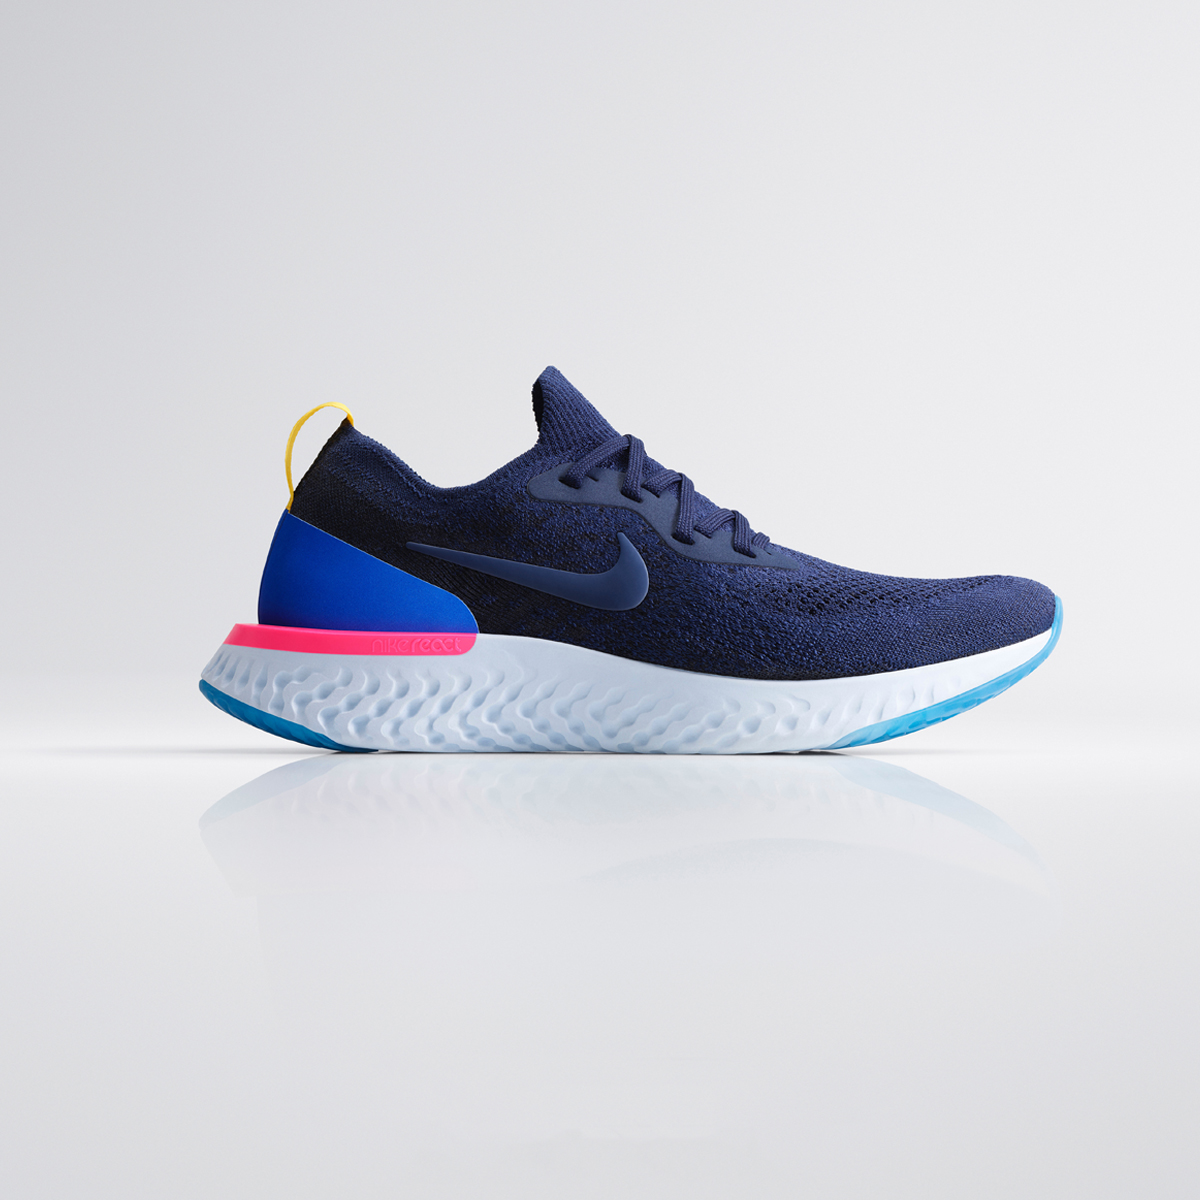 JD Sports Just Launched Nike Epic React 